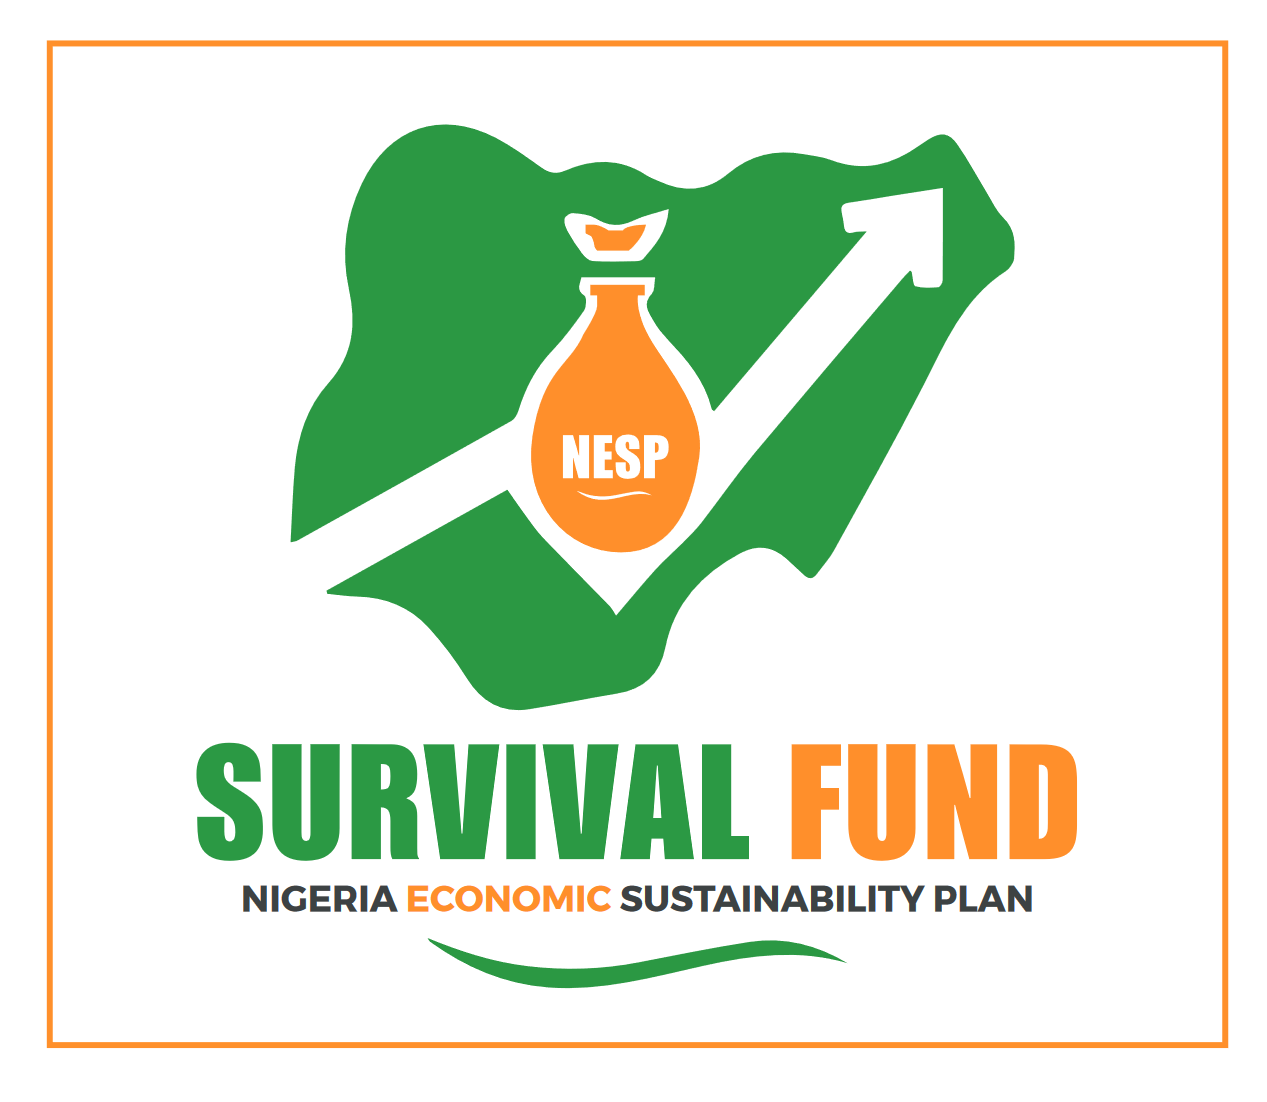 25 Things You Need to know about 75Billion Naira MSME Survival Fund to support self-employed persons and MSMEs across Nigeria.